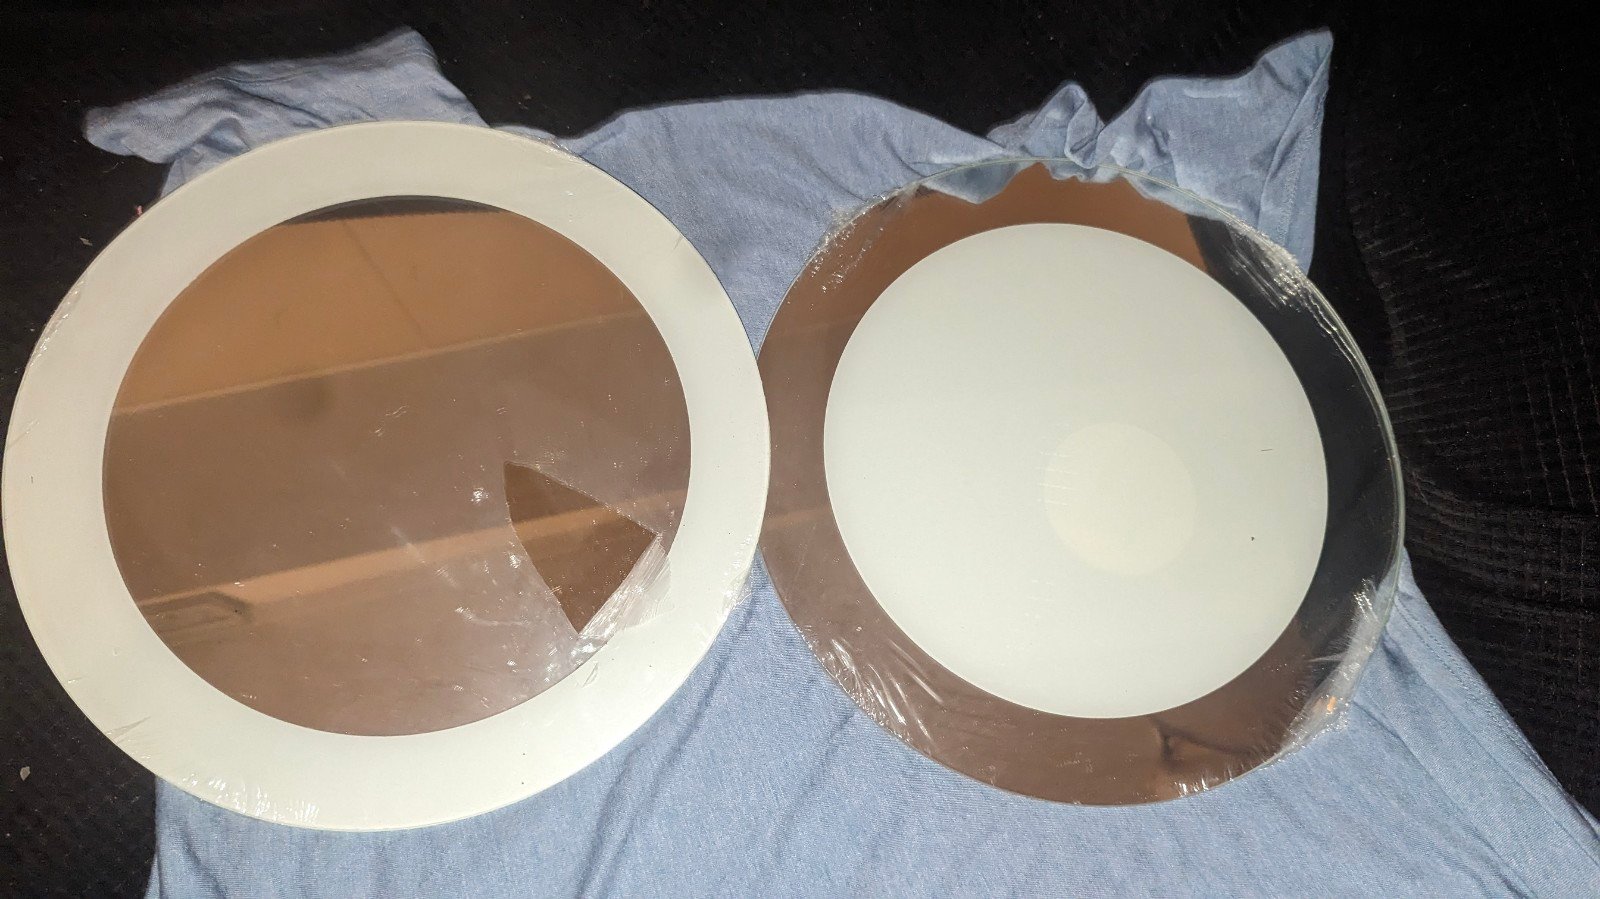 Mirror charger plates 2rOmYoi07